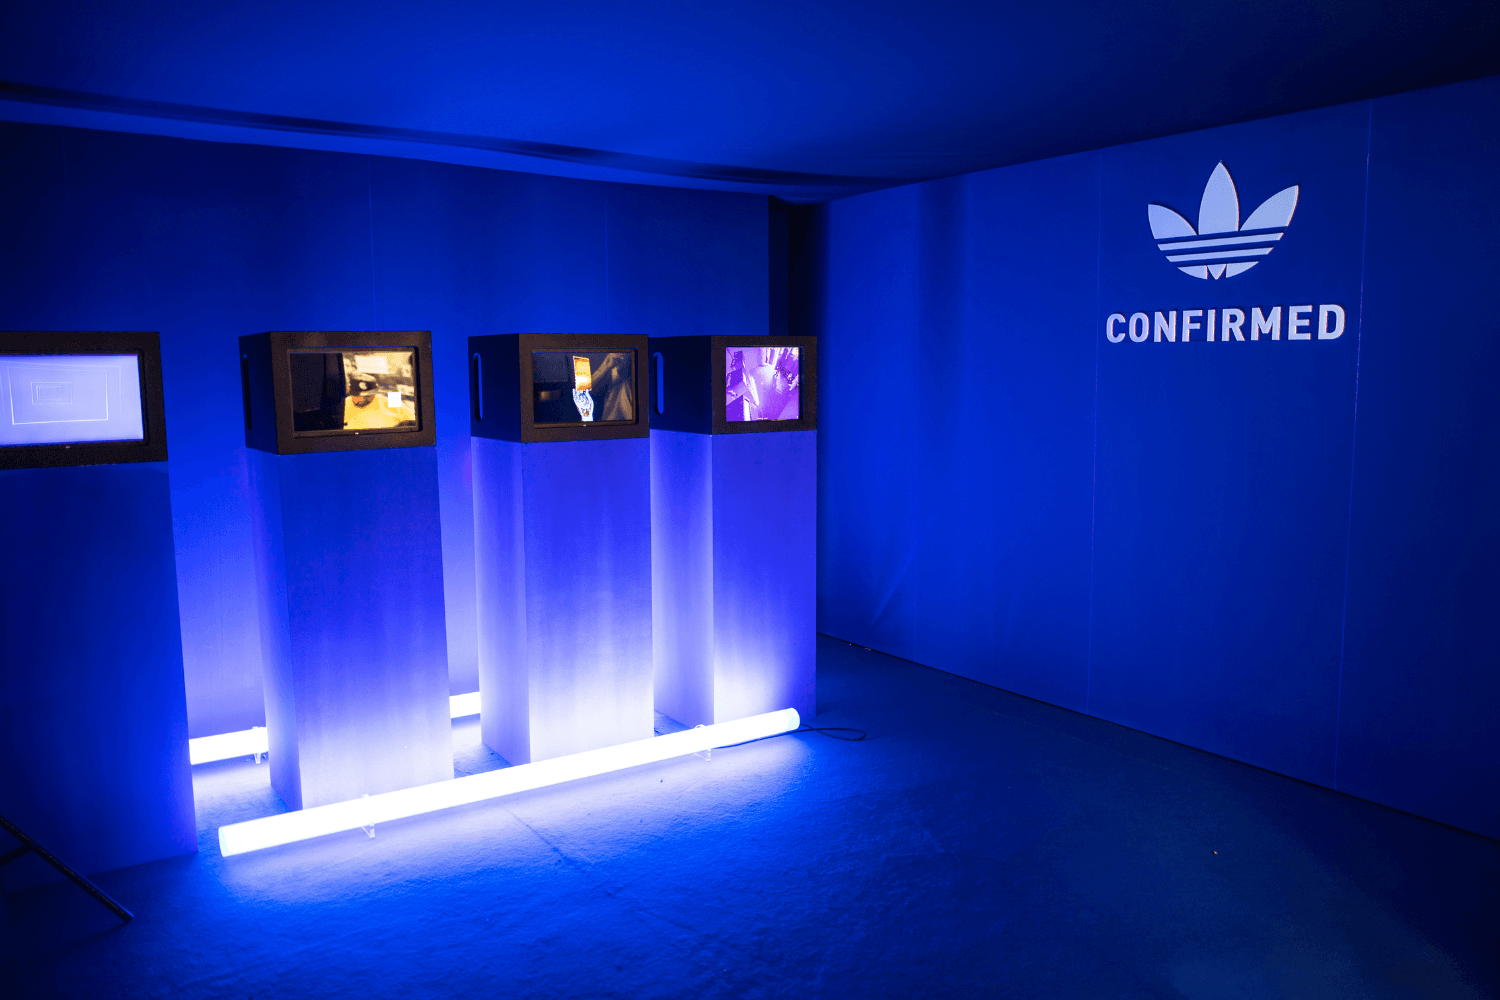 The adidas CONFIRMED Pop-Up comes to Amsterdam